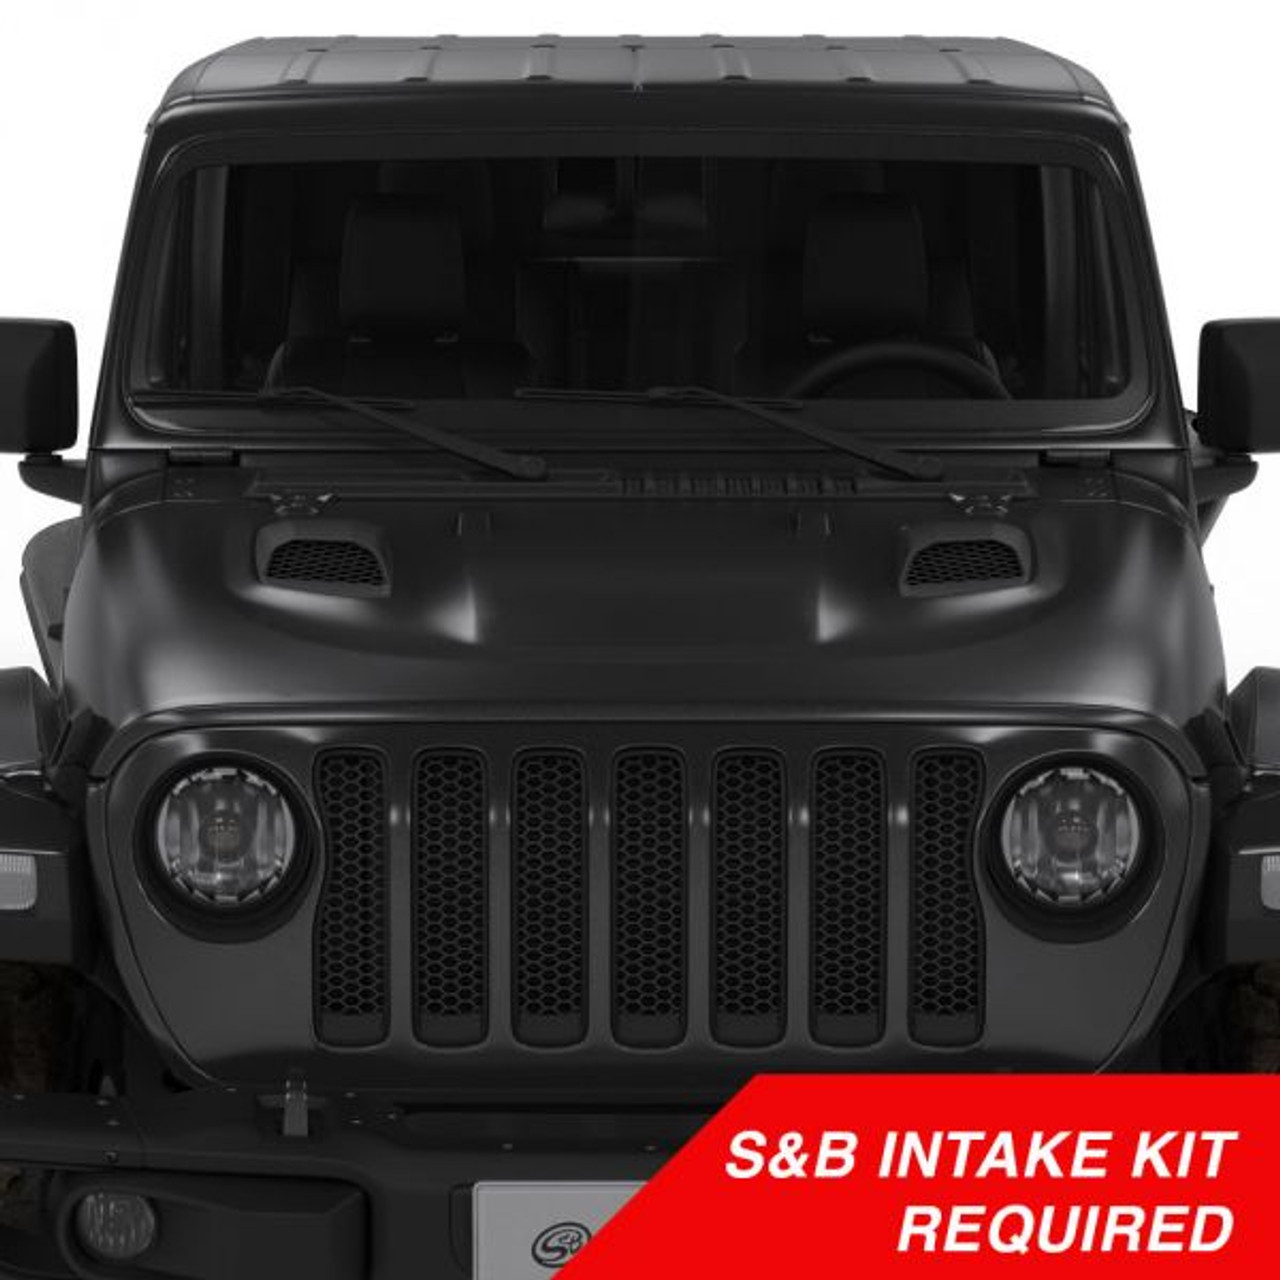 Air Hood Scoop System for 18-22 Wrangler JL Rubicon 2.0L, 3.6L, 20-22 Jeep Gladiator 3.6L S&B Intake Required